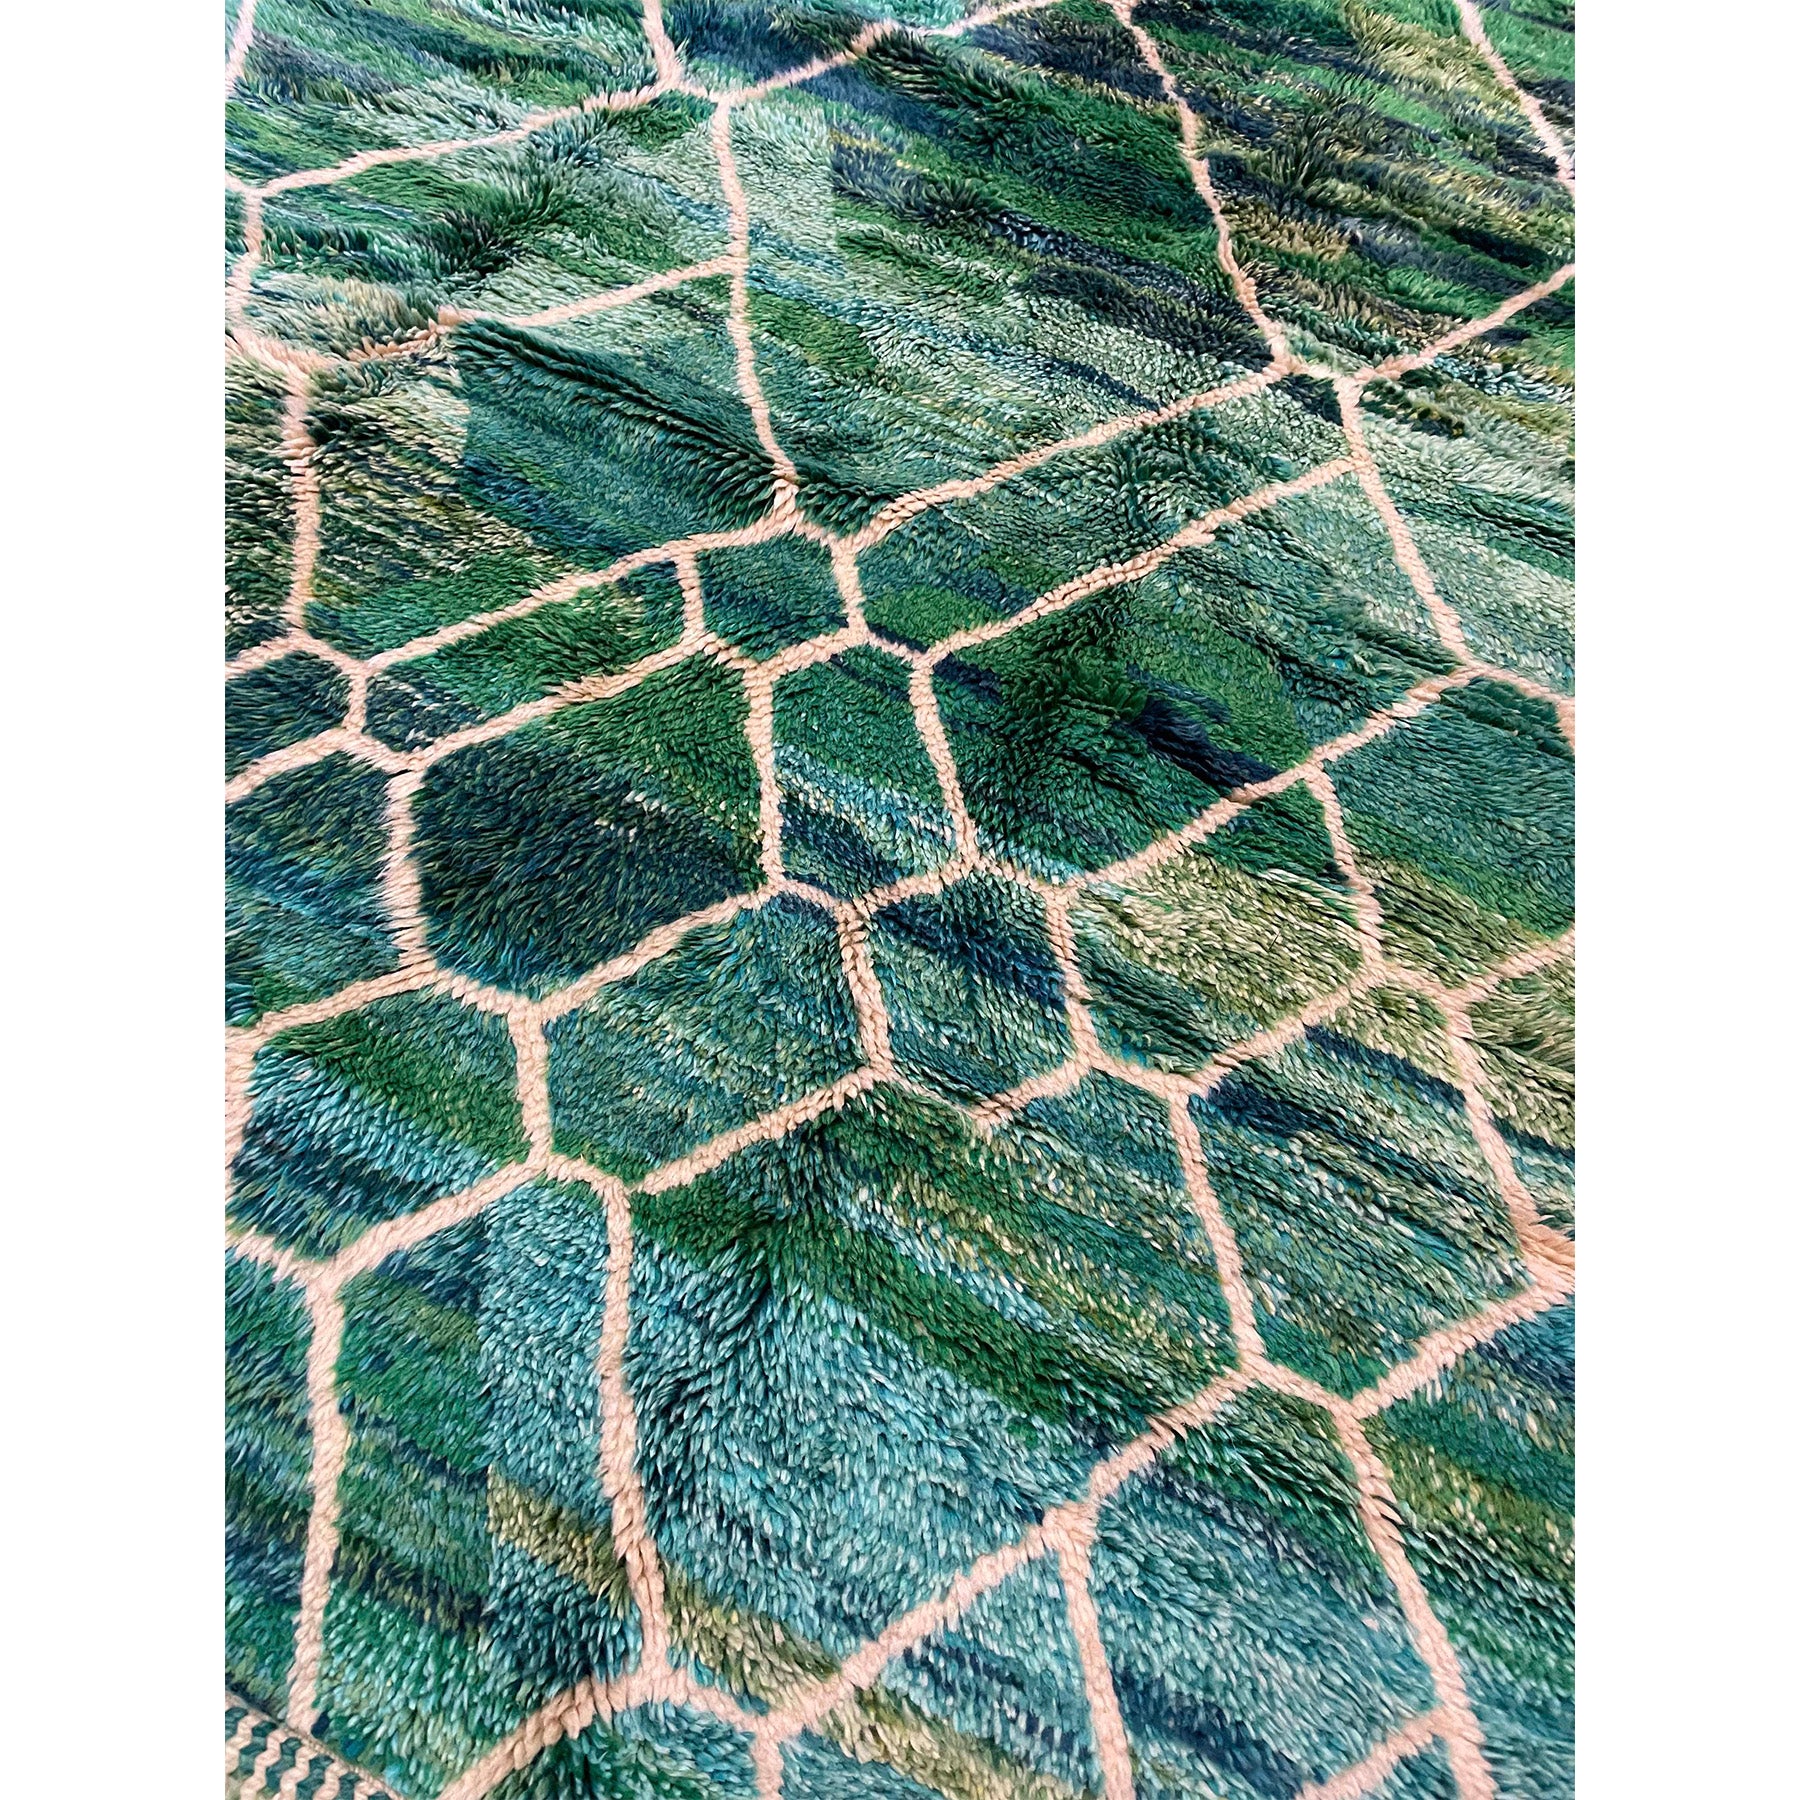 Green and blue Moroccan Beni rug with honeycomb design in white lines  | Kantara Moroccan Rugs in Los Angeles at The Rug Shop